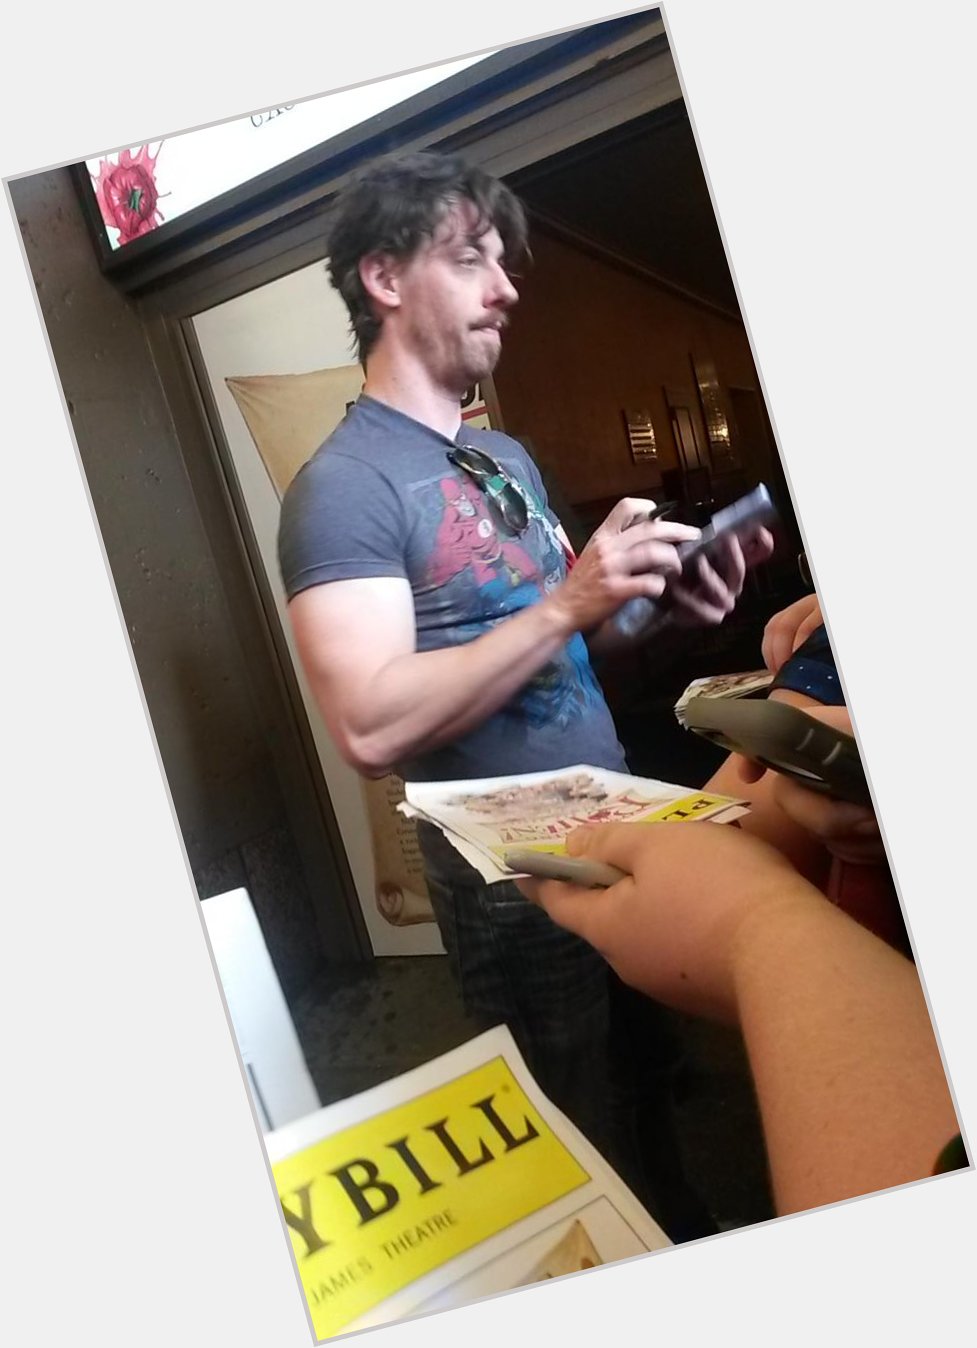 Happy Birthday Christian Borle! Thanks for being awesome and making me sorta like Shakespeare 